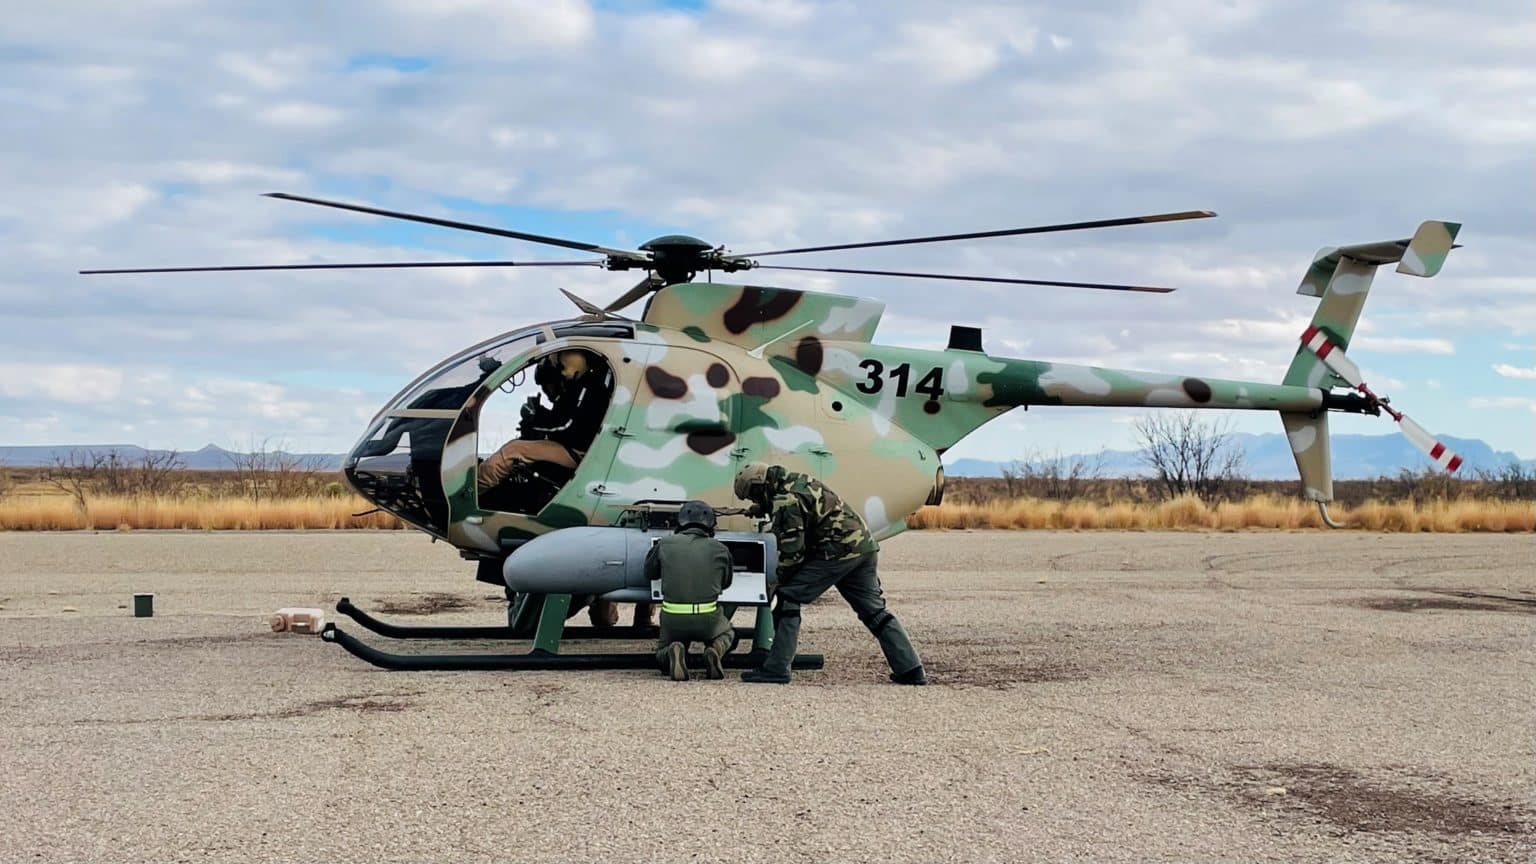 MD 530F Cayuse Warrior light attack and reconnaissance helicopter